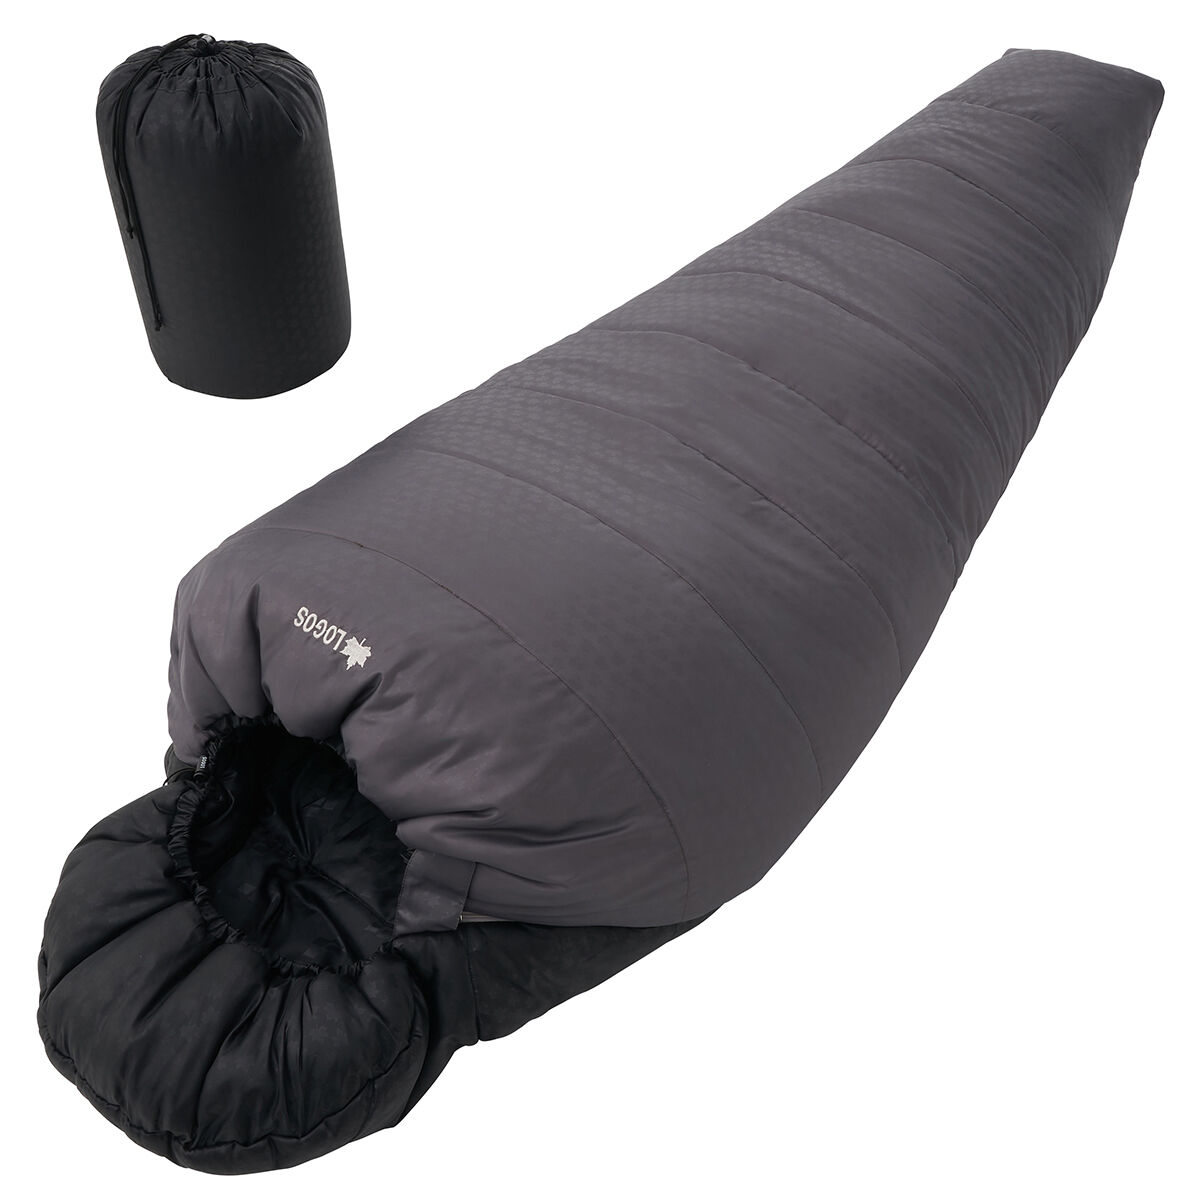 Shop Shop All Sleeping Bags & Beds | LOGOS Official Global Online 